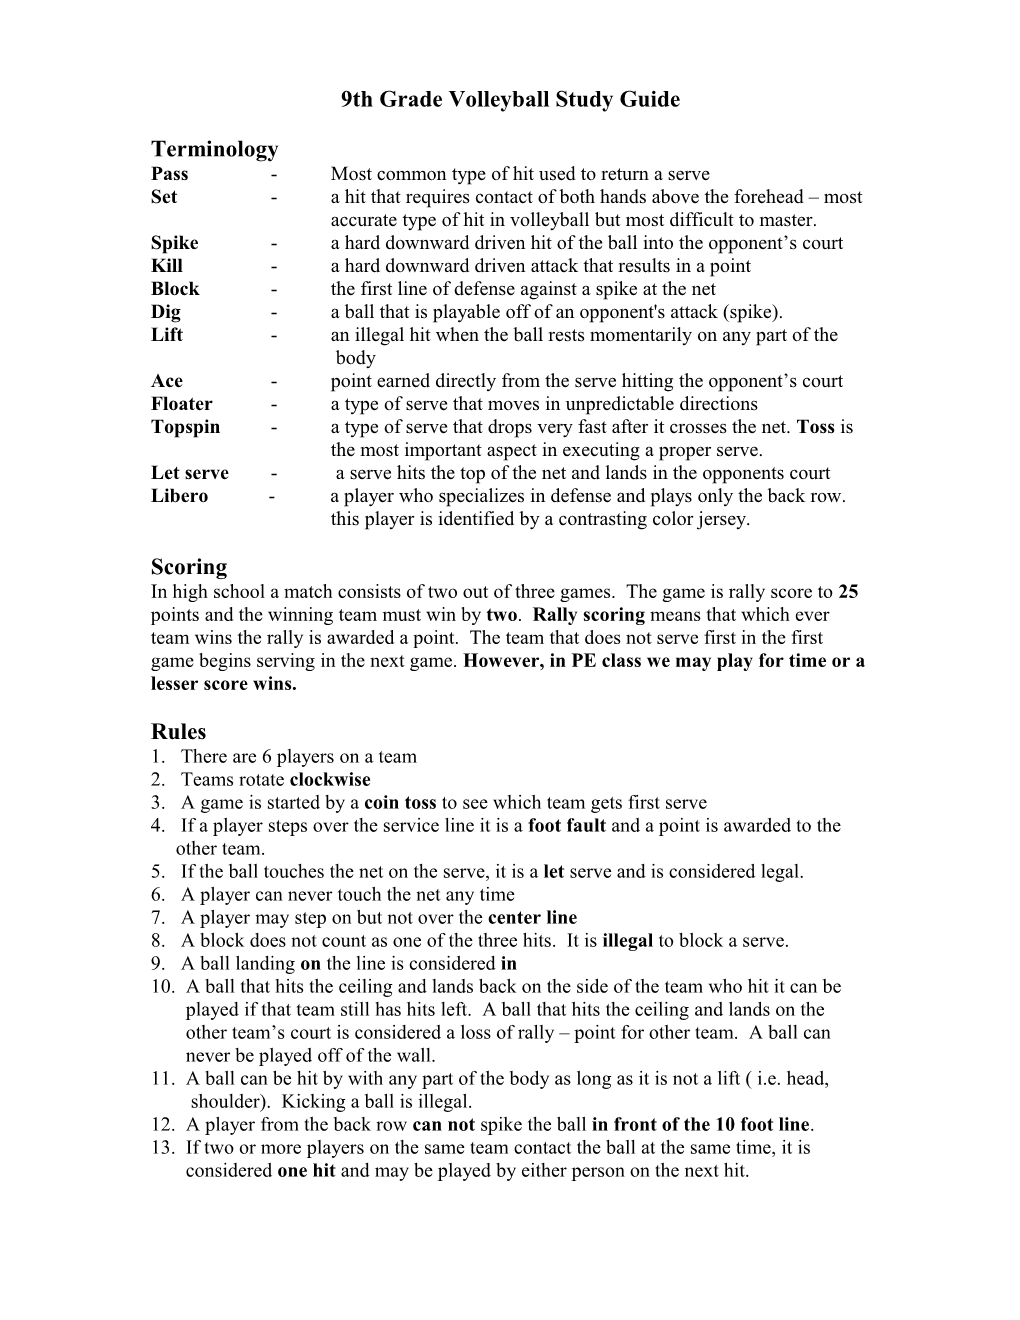 9Th Grade Volleyball Study Guide